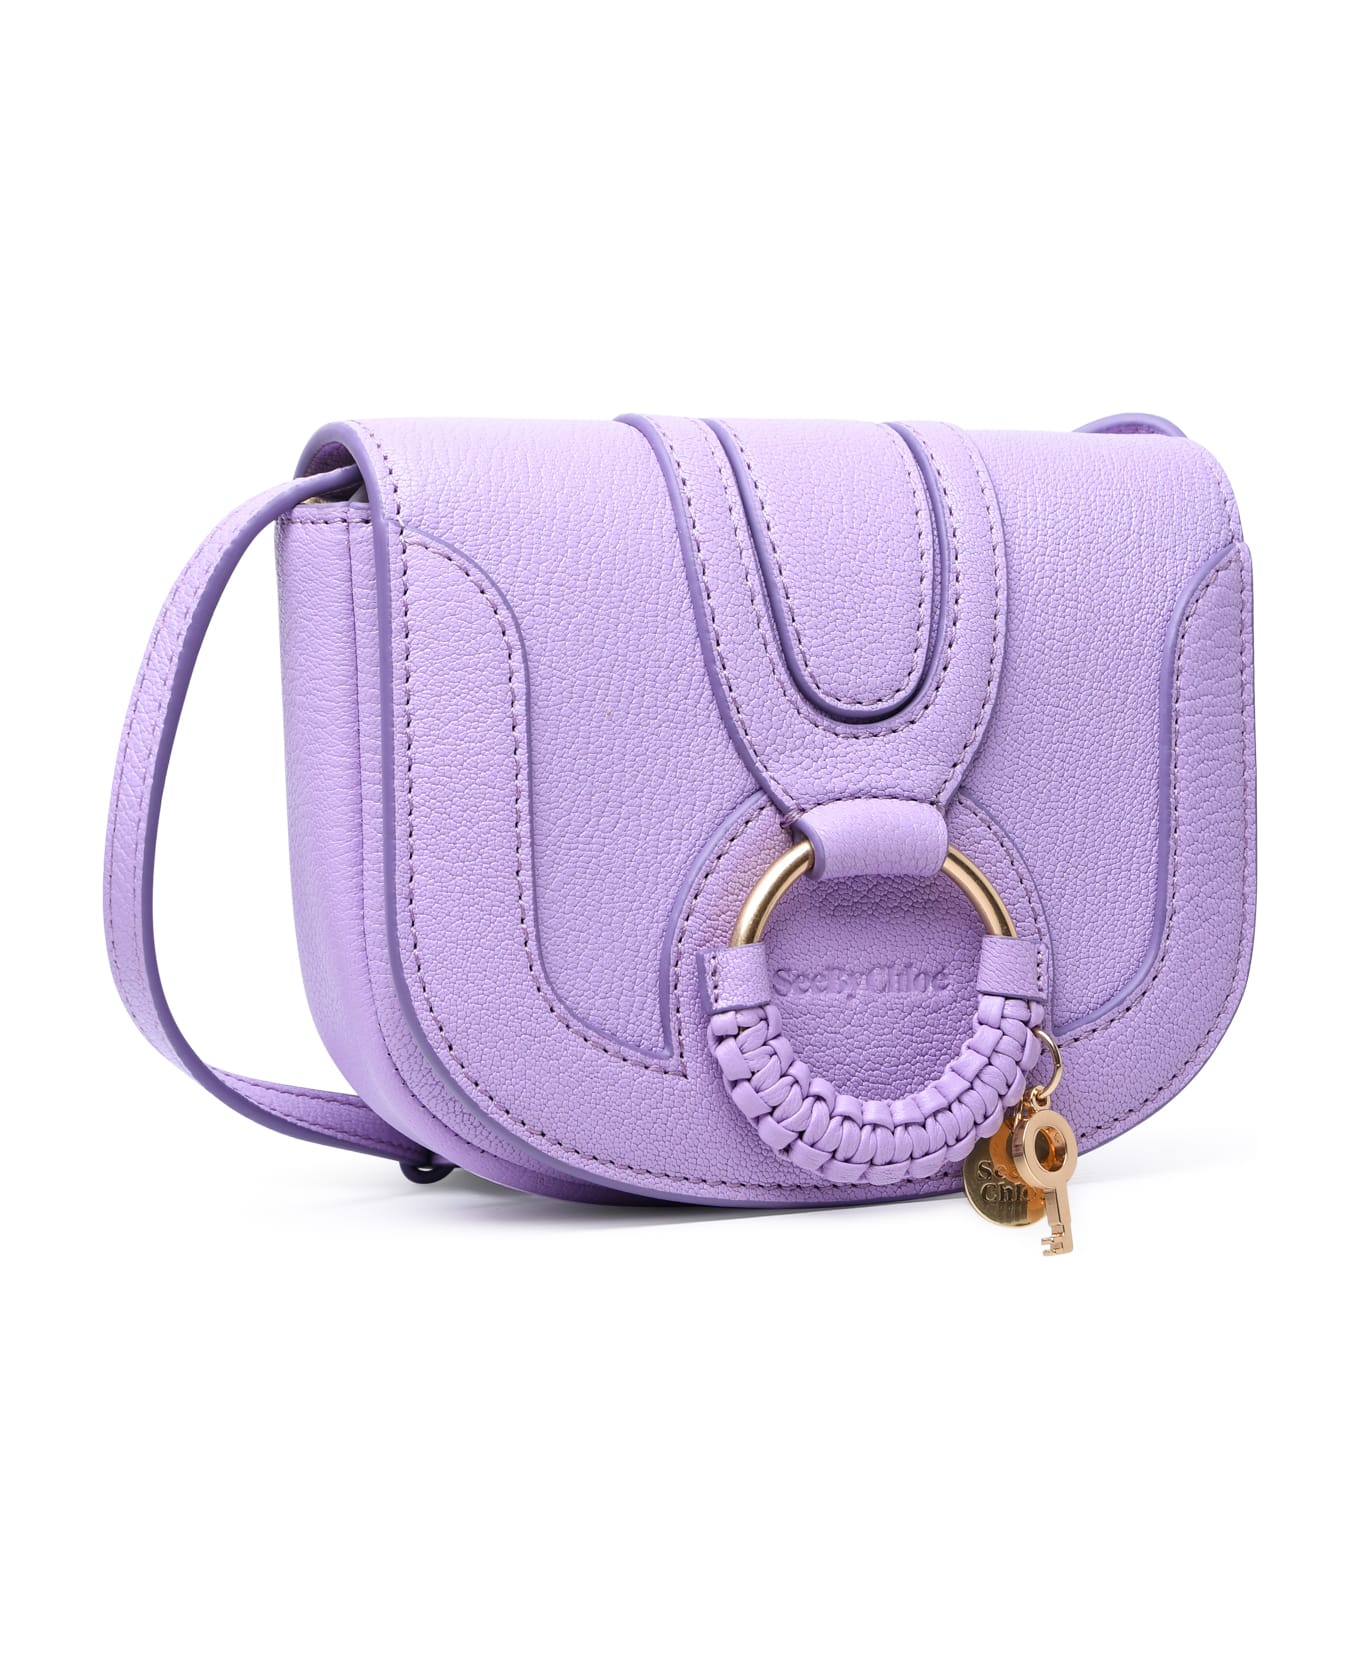 See by Chloé 'hana' Small Lilac Leather Bag - Liliac トートバッグ